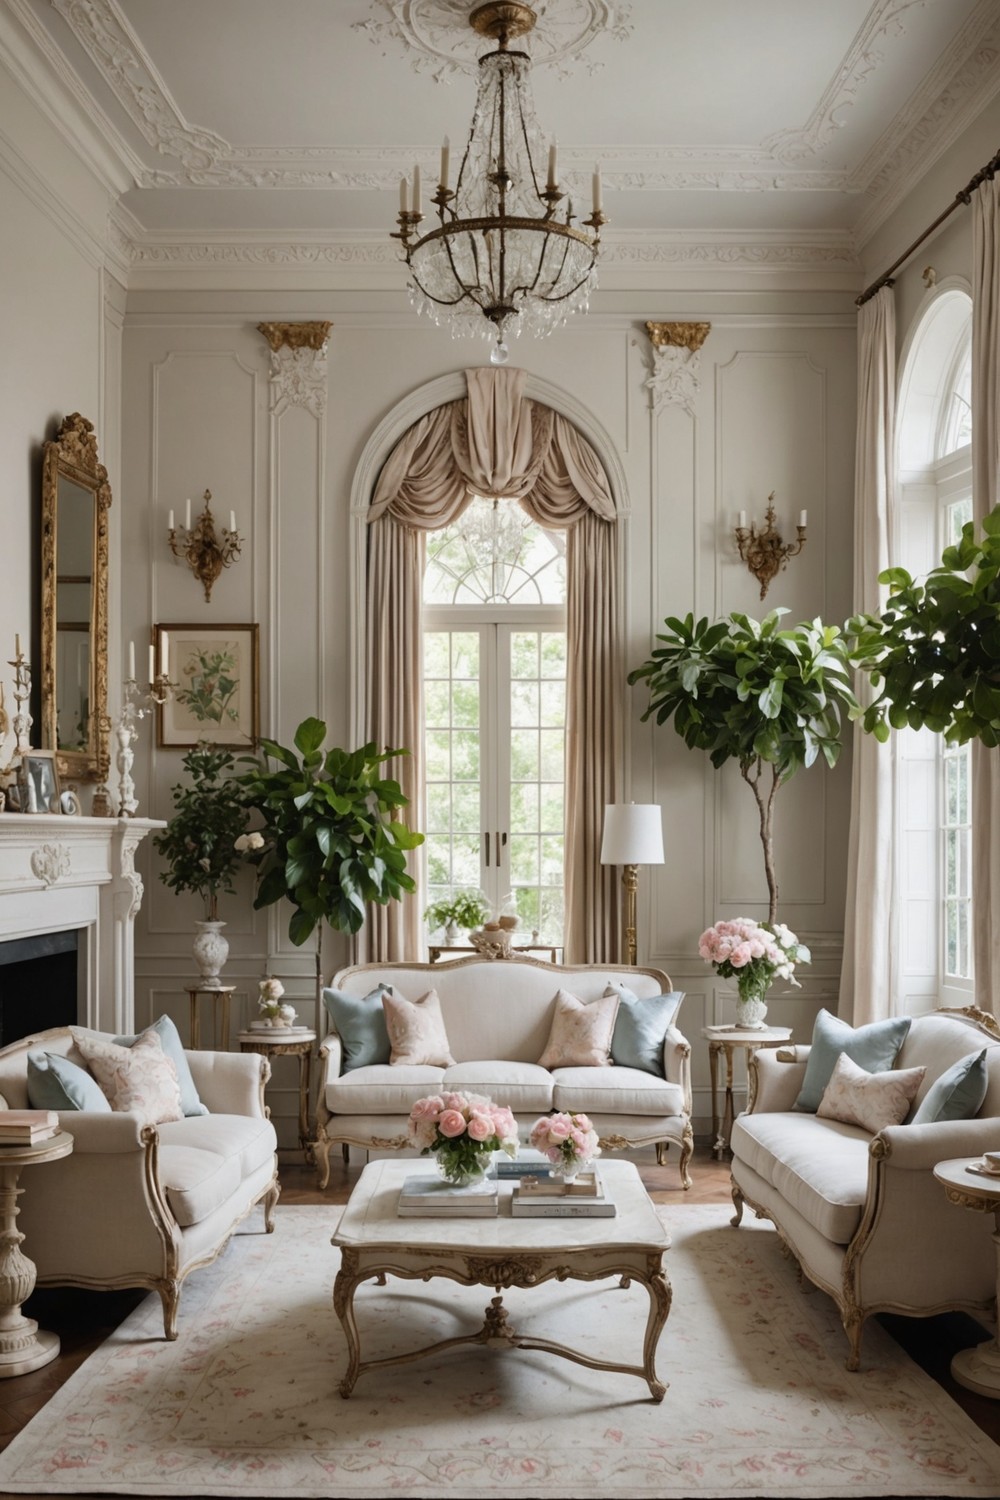 Elegant, Understated Color Schemes: Neutrals with a Touch of Whimsy